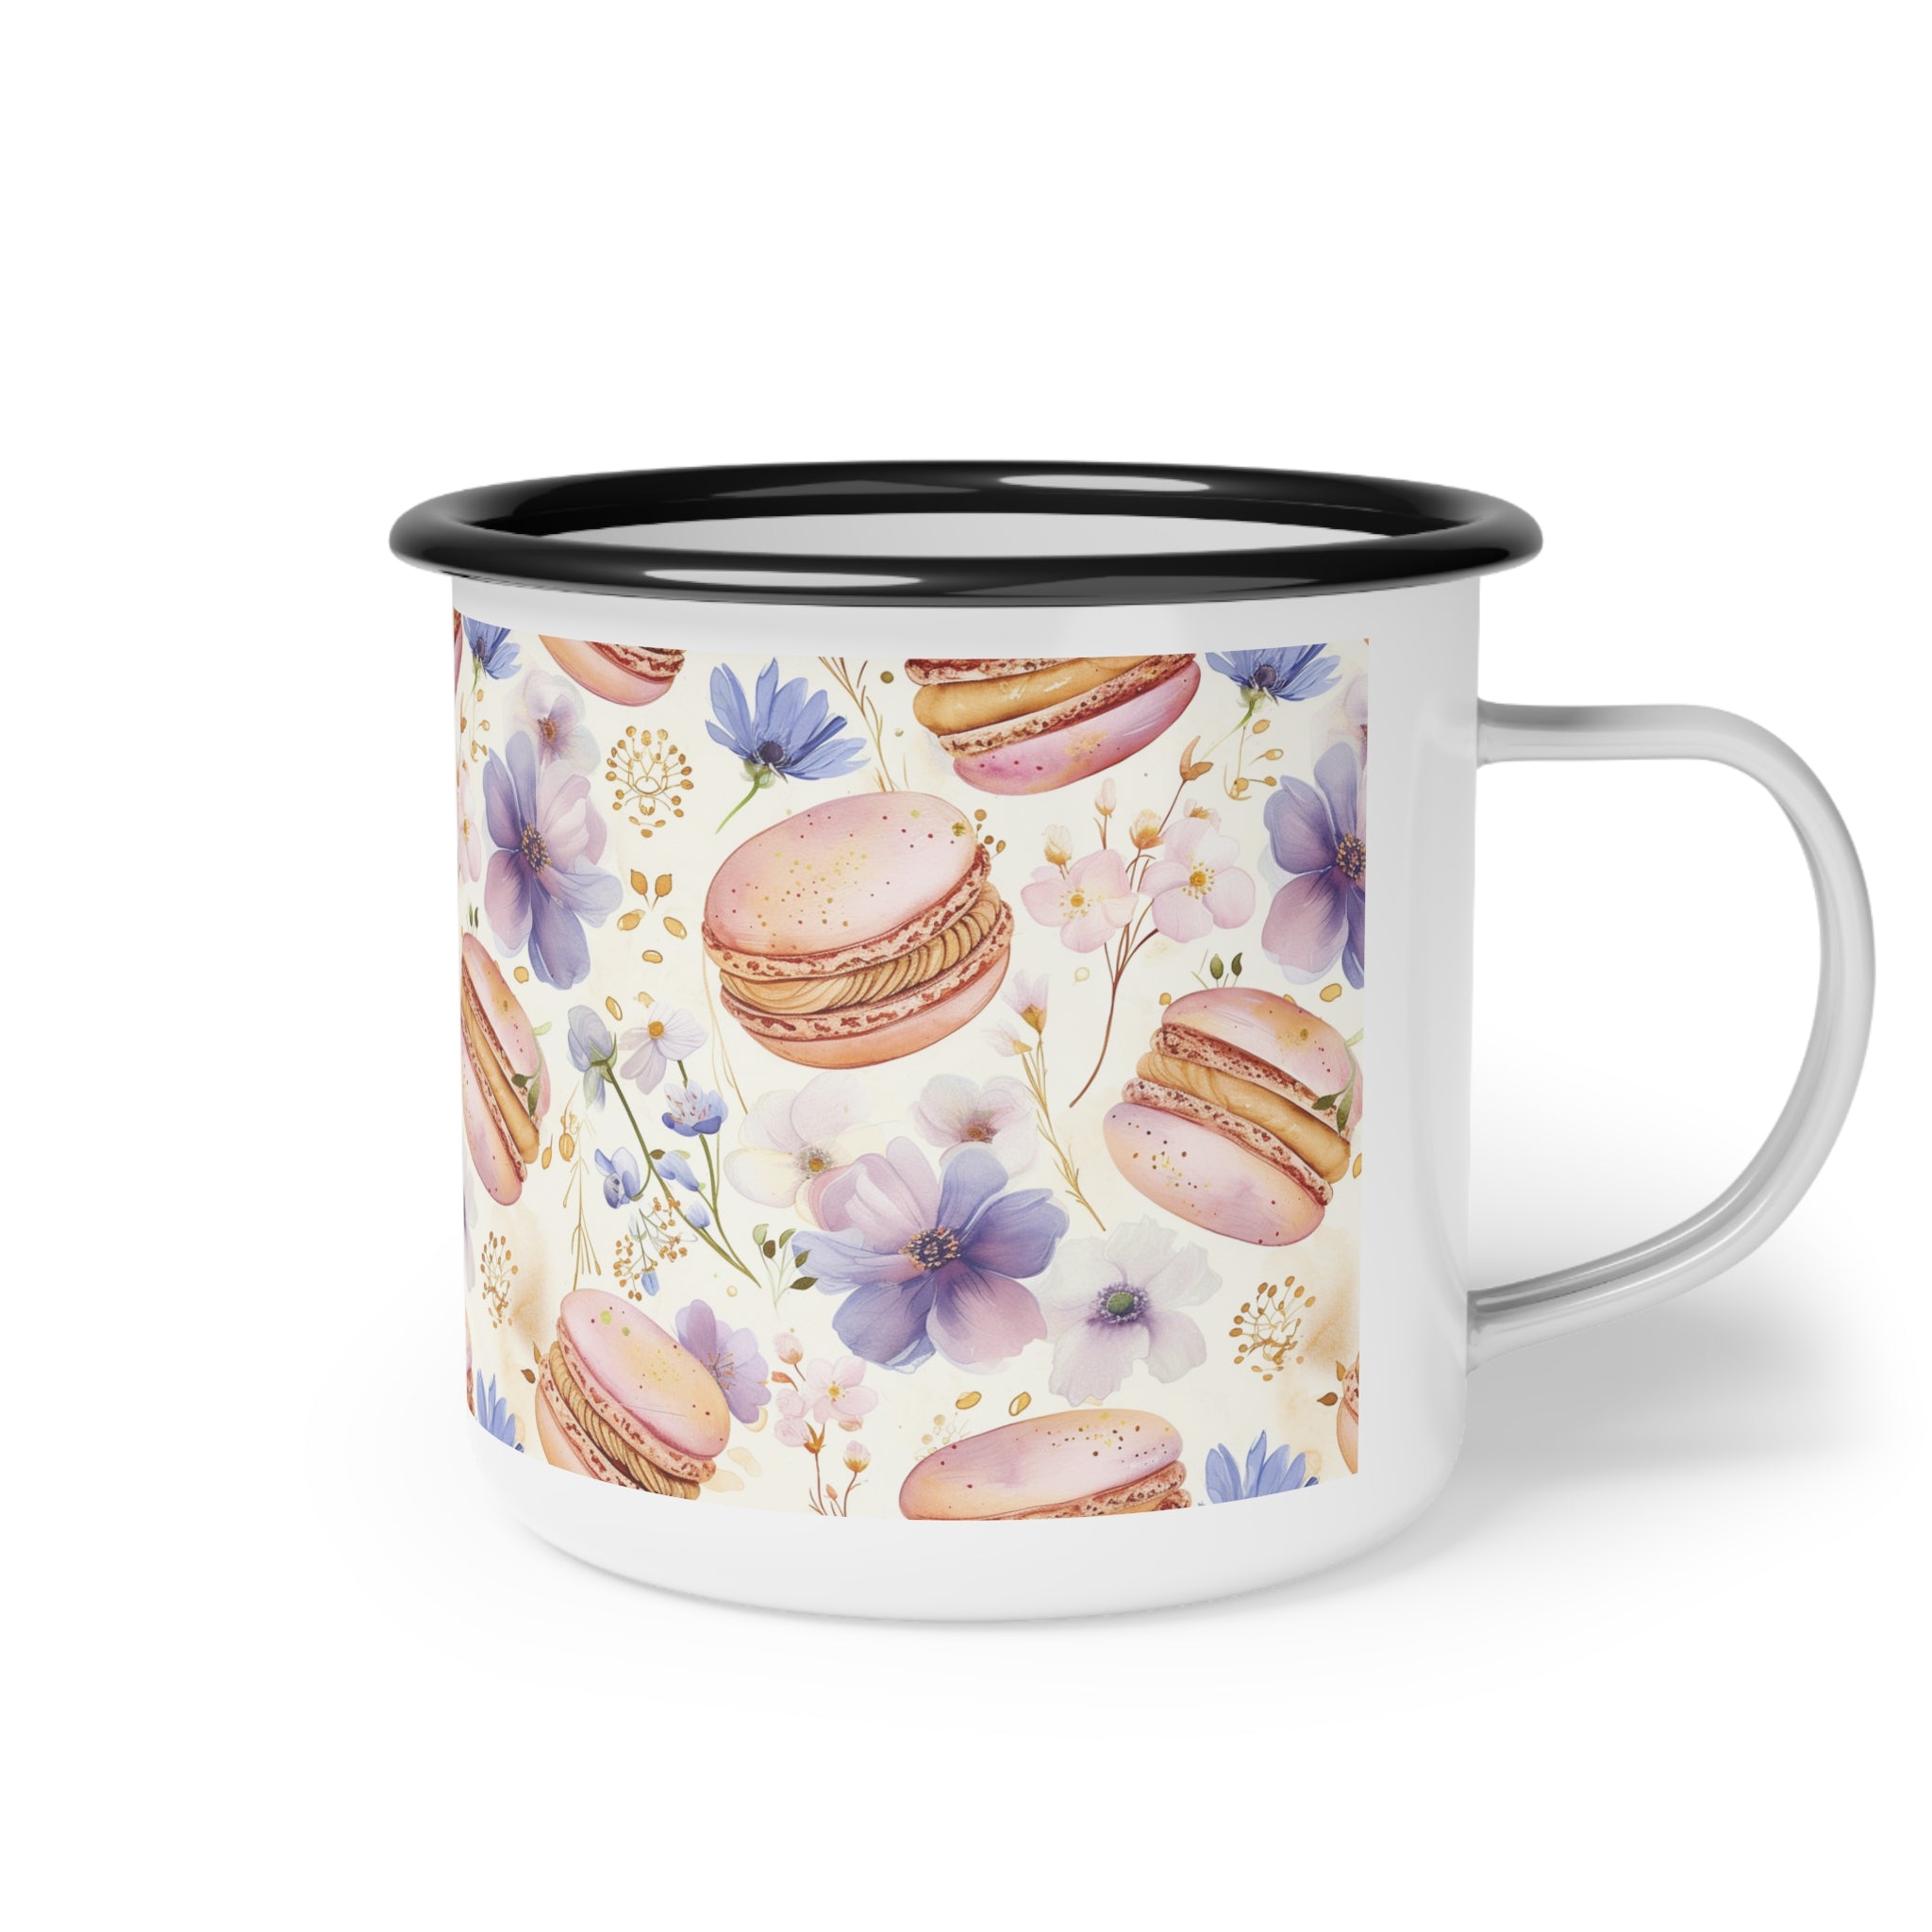 Embrace Sweetness: 'It's Raining Macaroons!' Enamel Camp Cup - A Delightful Kitchen Accessory for Foodies & Pastry Lovers